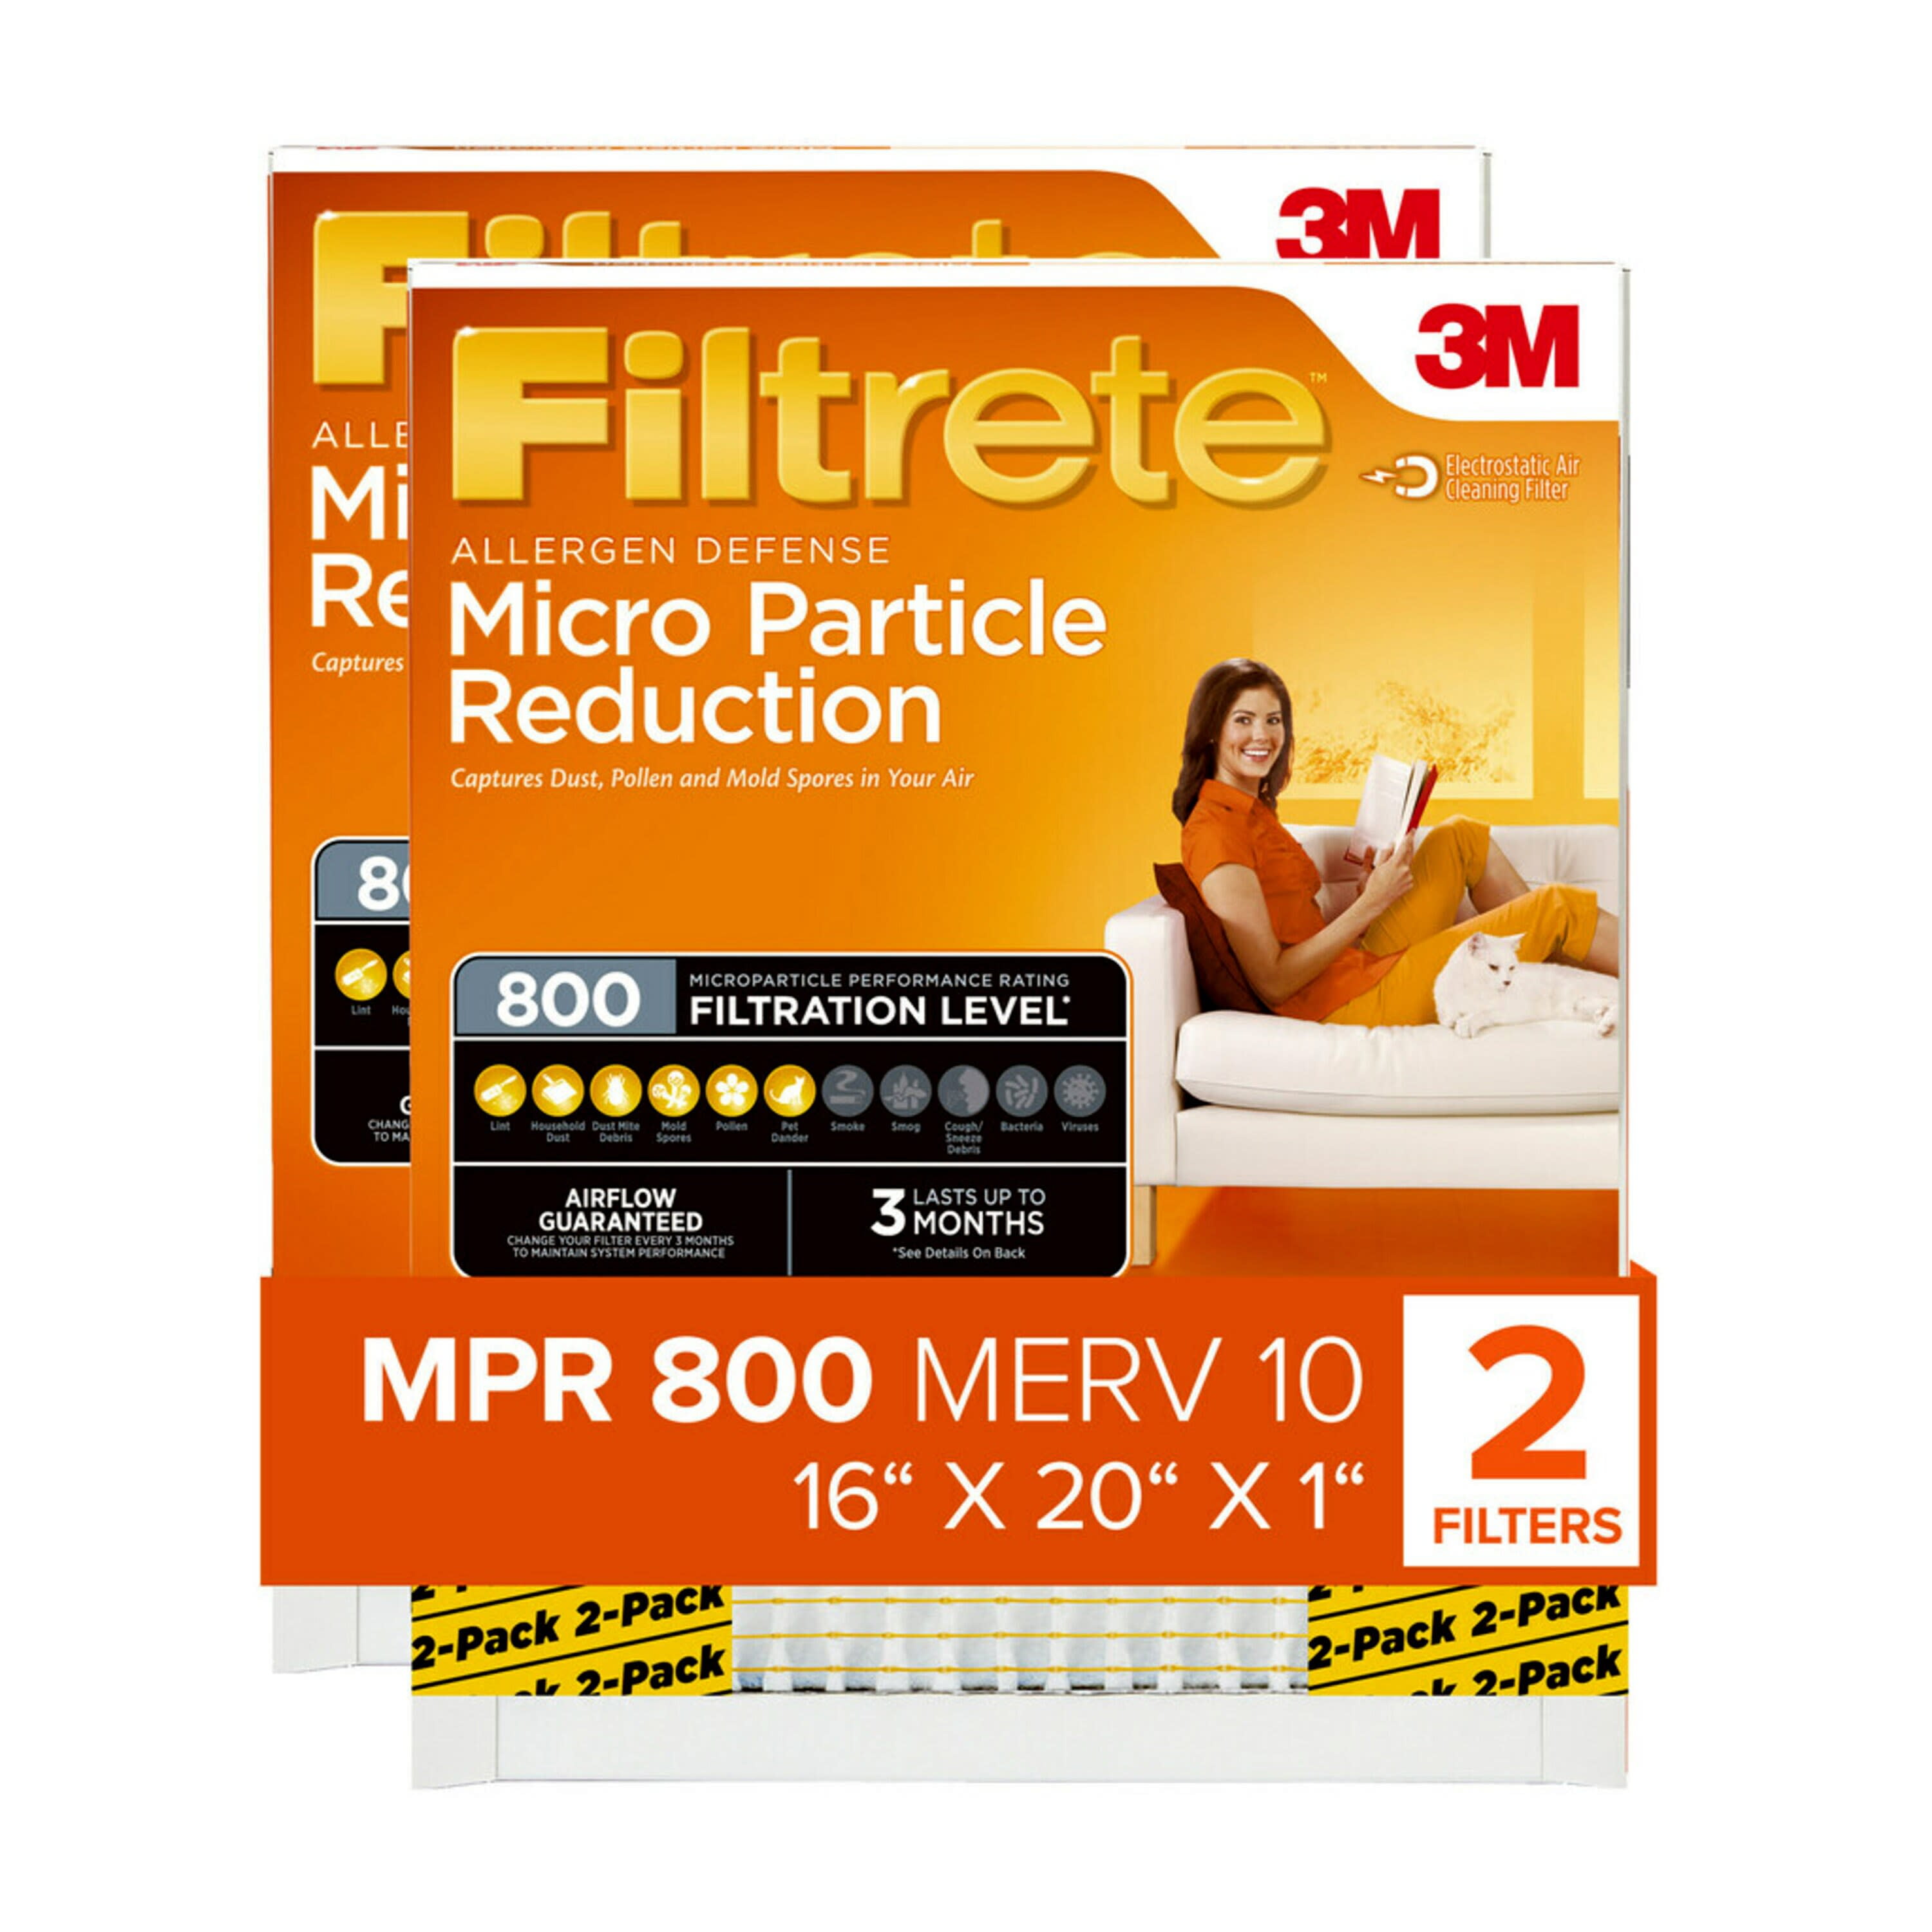 Filtrete by 3M, 16x20x1, MERV 10, Micro Particle Reduction HVAC Furnace Air Filter, Captures Pet Dander and Pollen, 800 MPR, 2 Filters